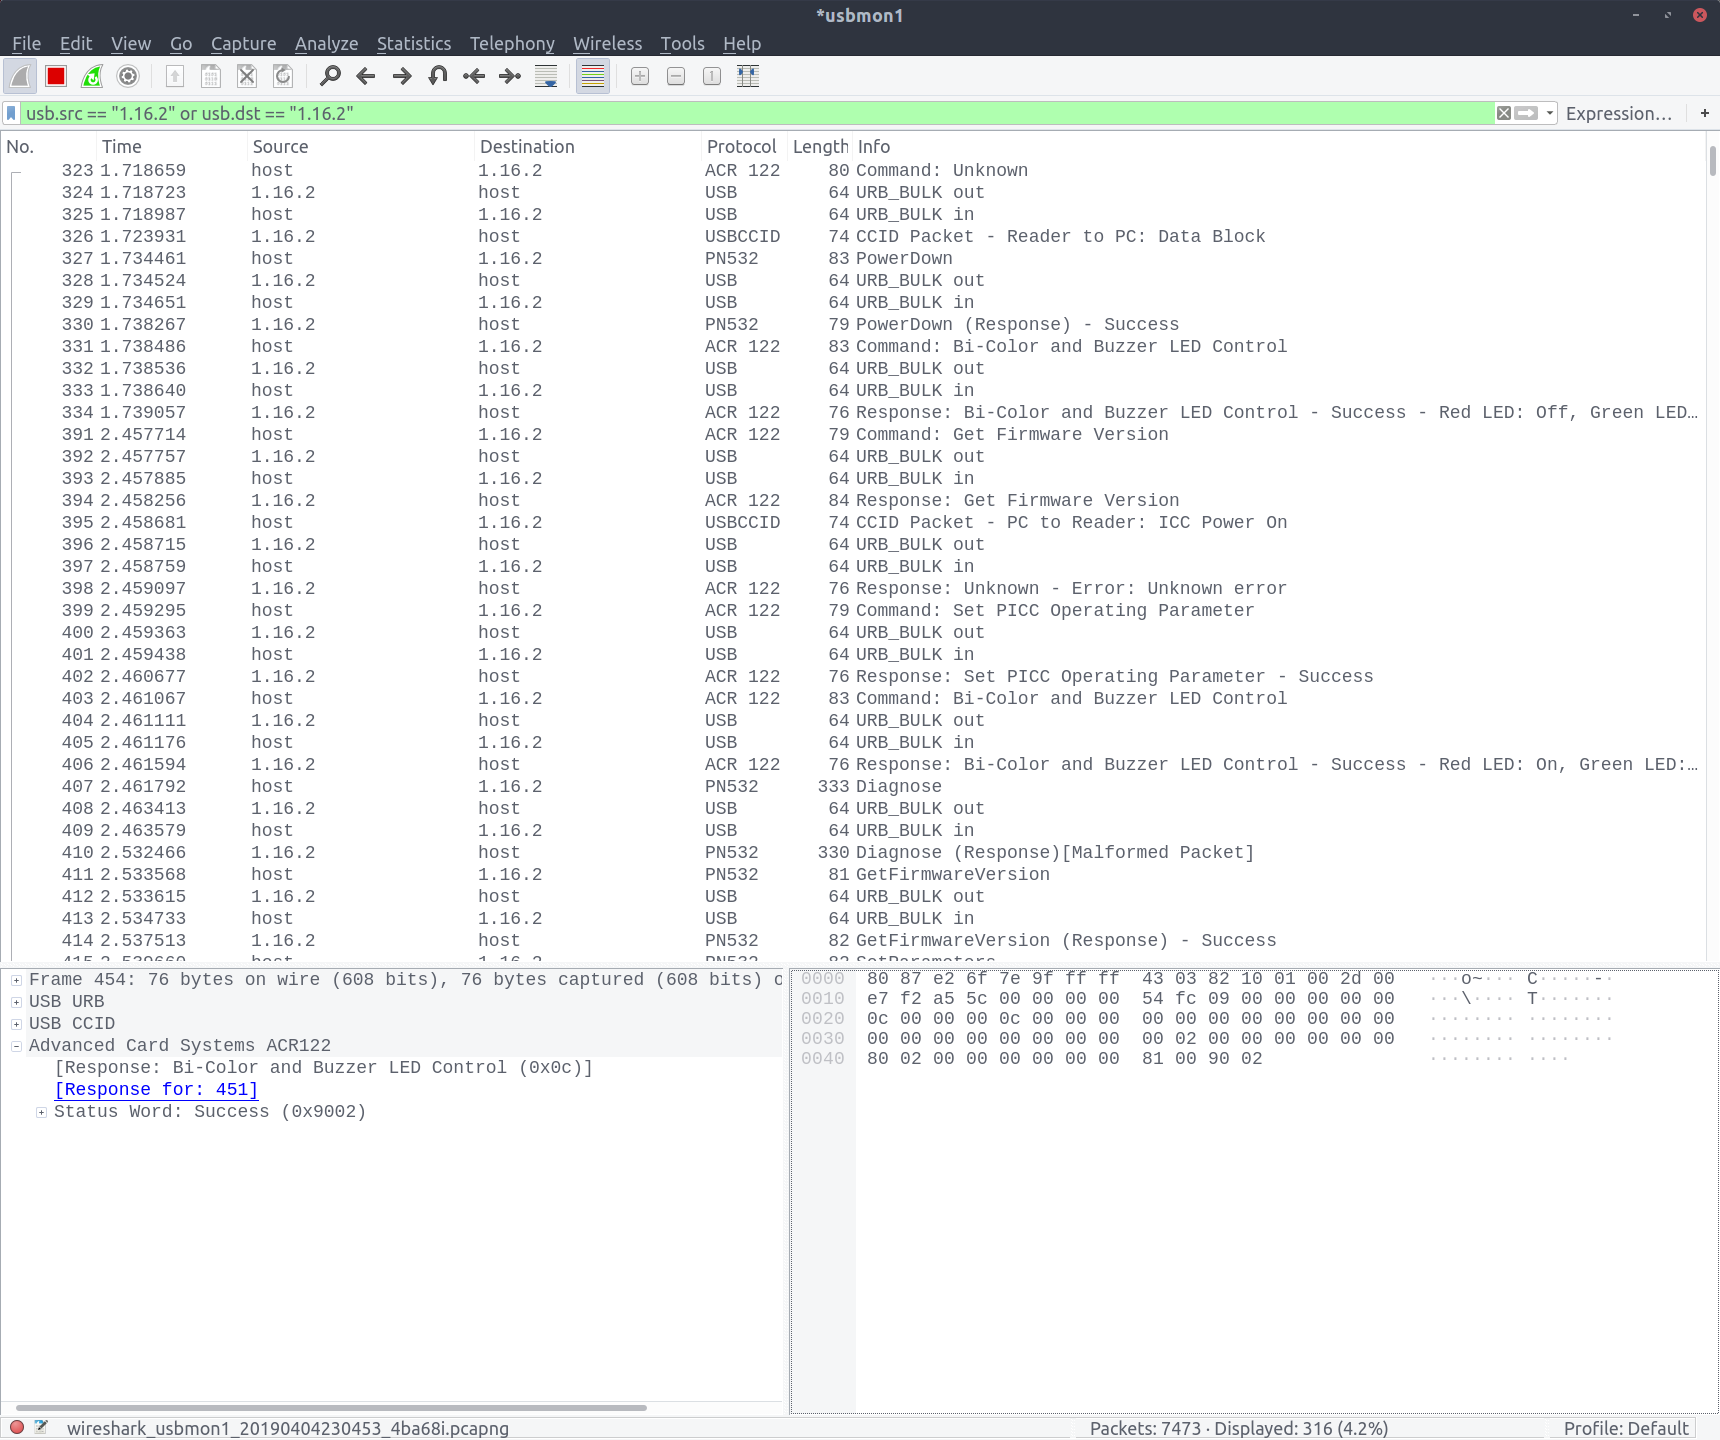 An assortment of ACR 122 packets recorded in Wireshark